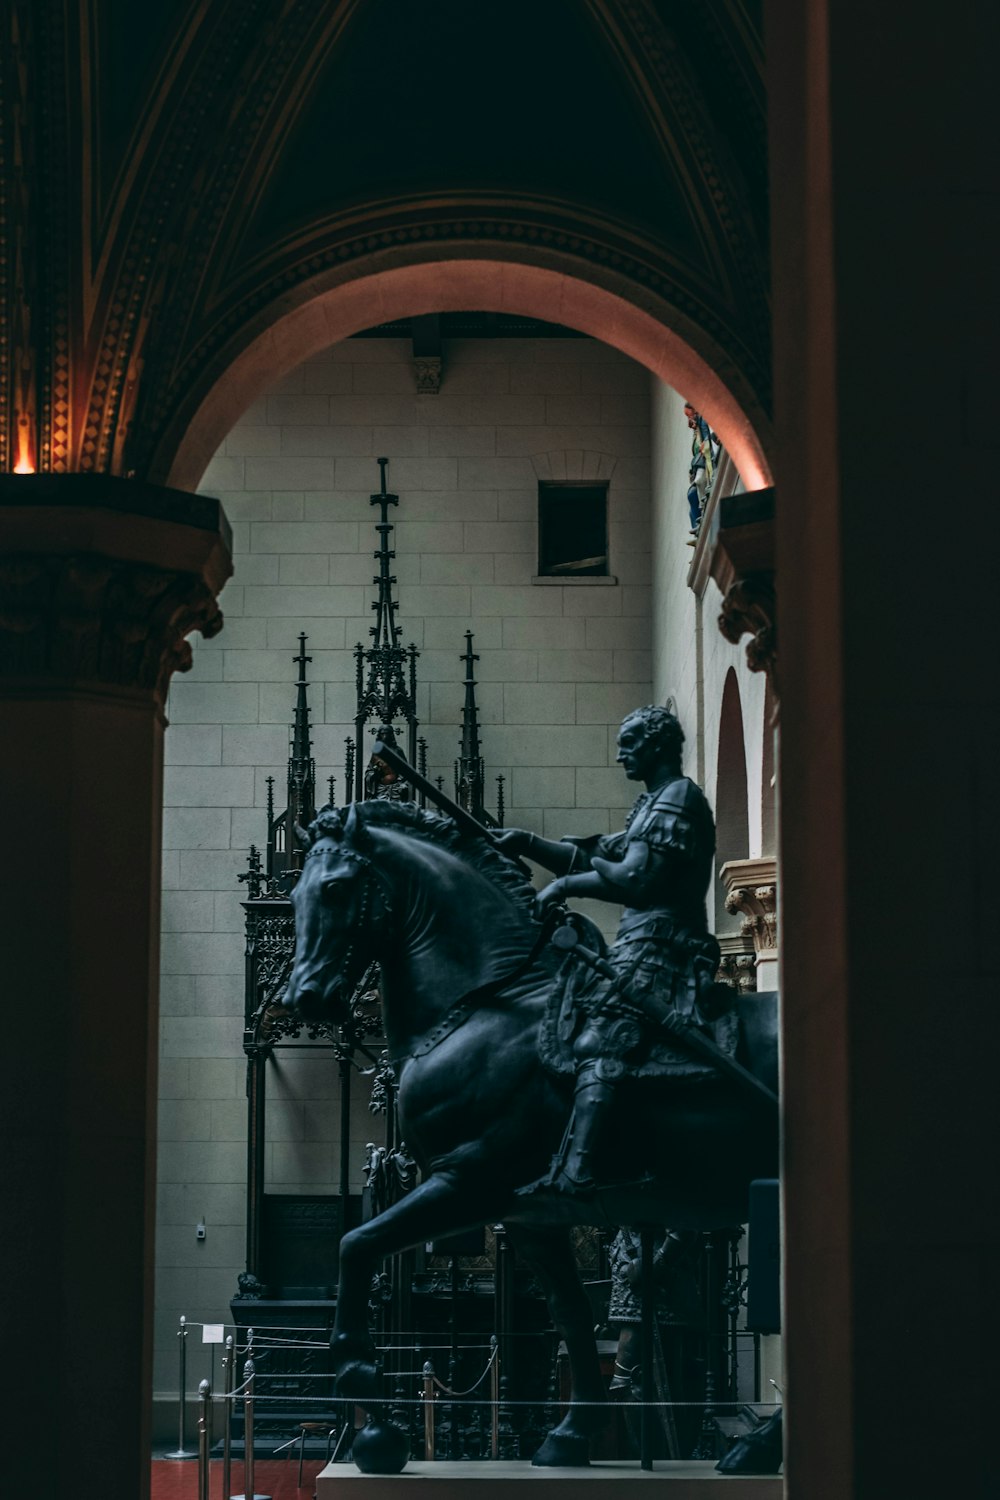 knight riding horse statue inside building